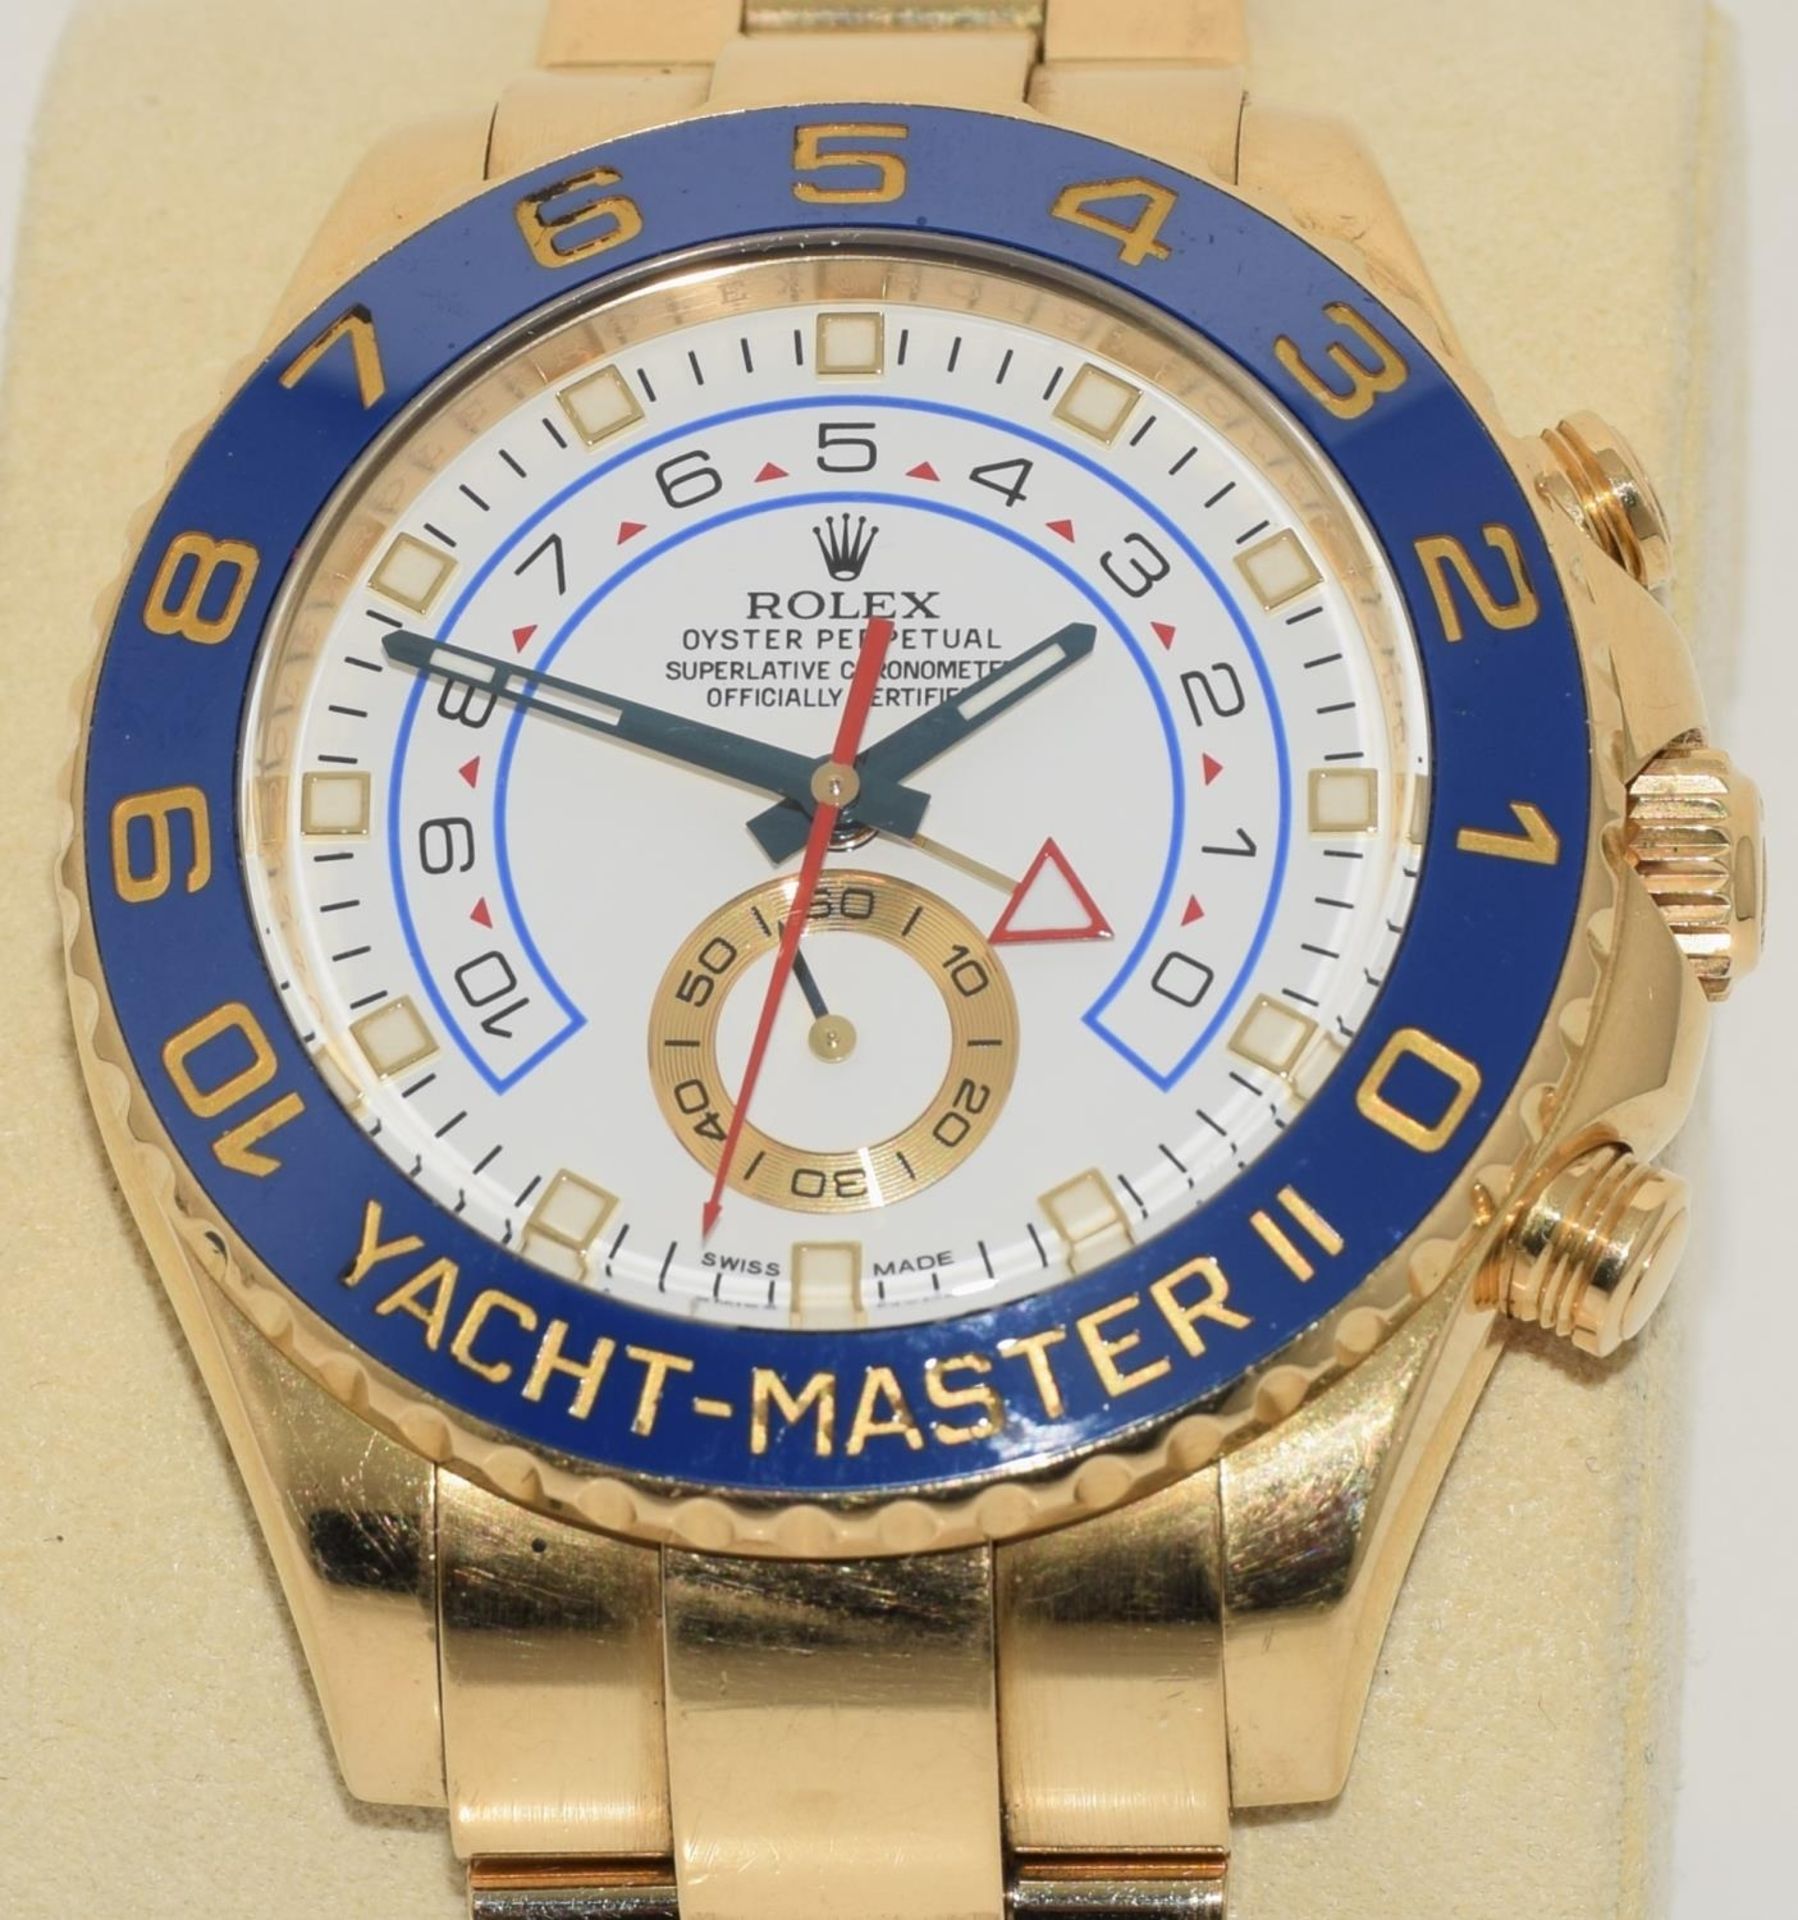 2014 Rolex Yachtmaster II 18ct gold ref 116688, boxed and papers. (ref 20) - Image 8 of 9